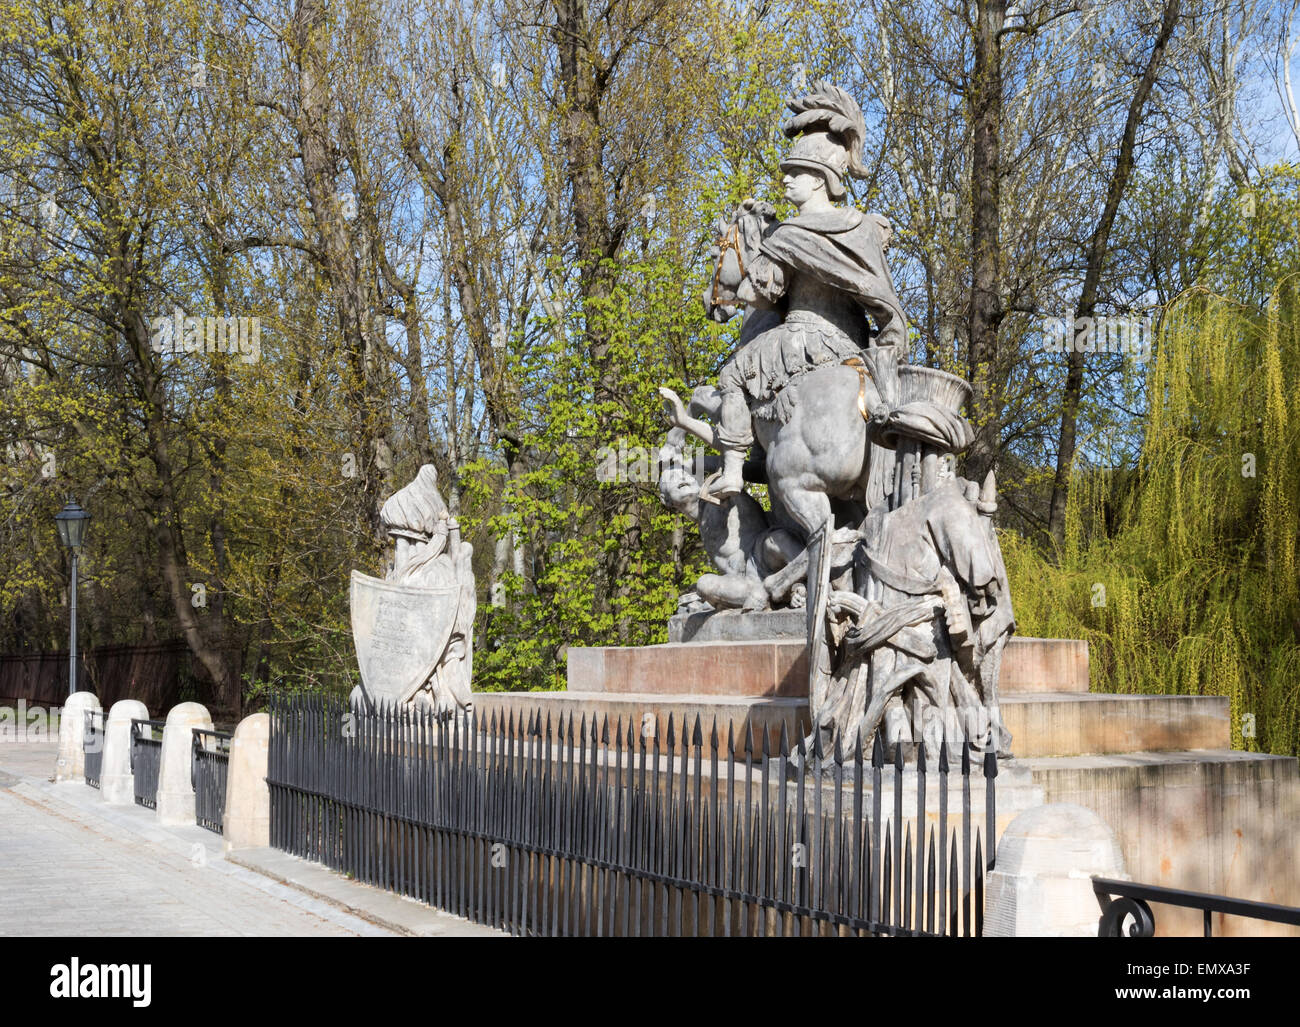 Poland,Warsaw.Statue of King John III Sobieski in Warsaw near Lazienki Royal Park.Sculpture carved by Francis Pinck placed oppos Stock Photo